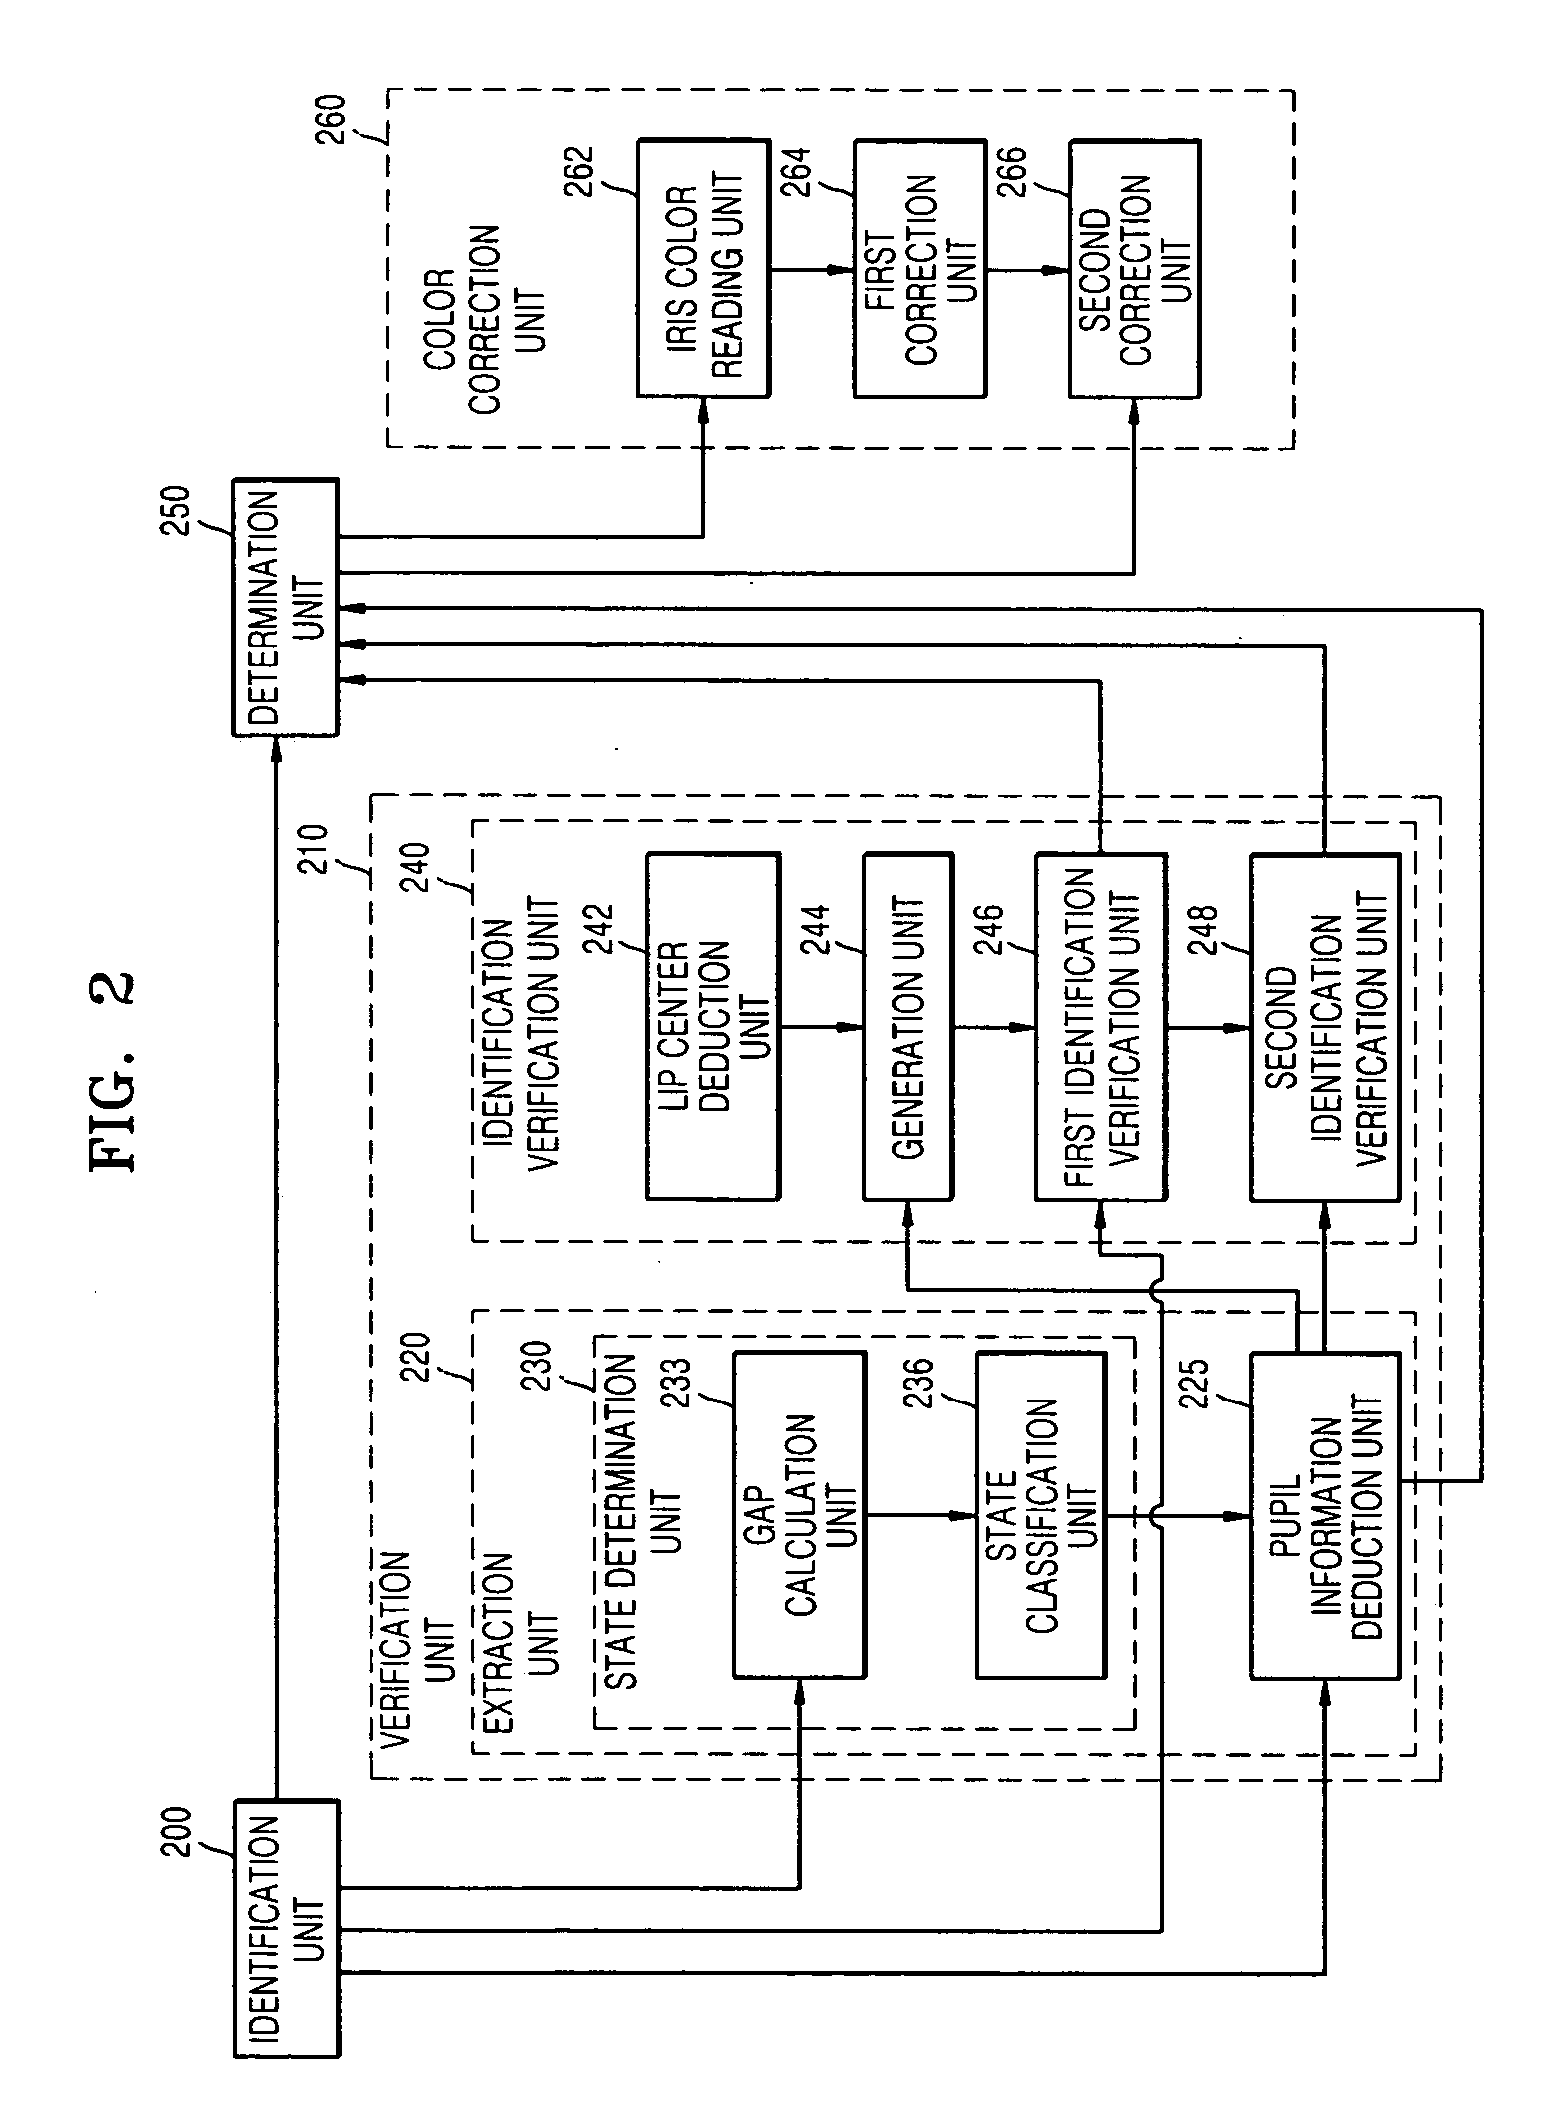 Image correction method and apparatus